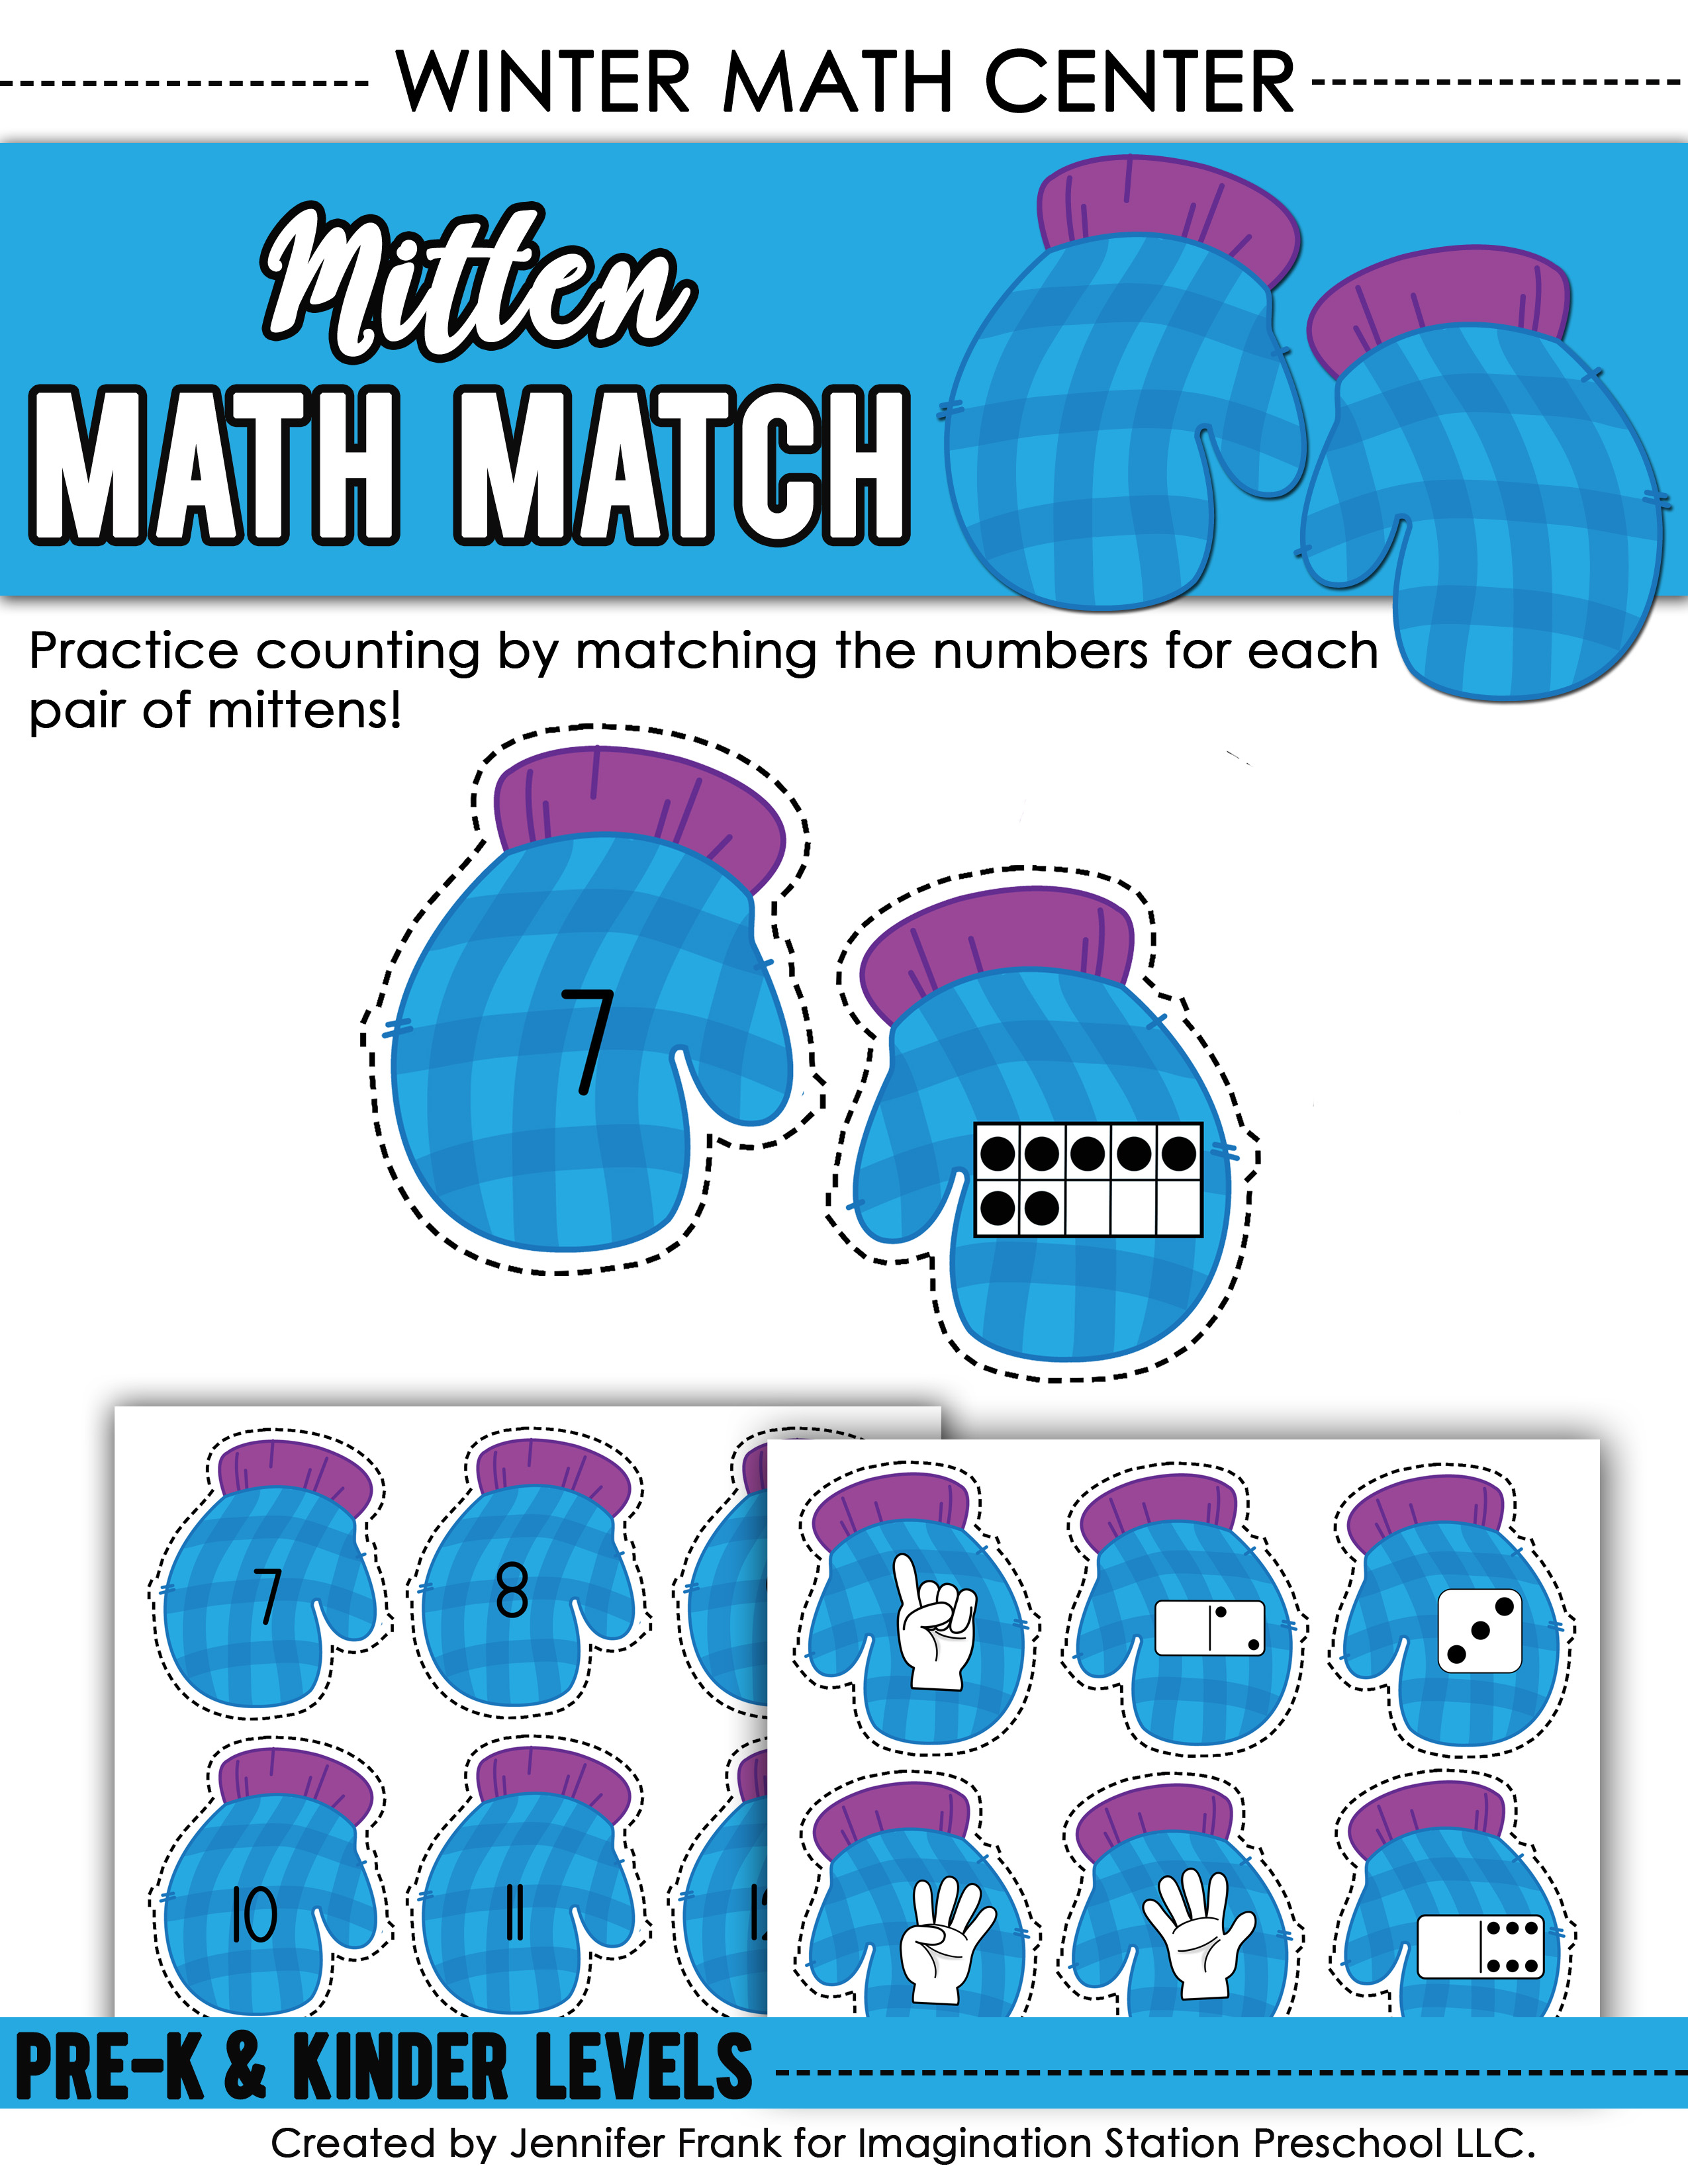 mitten-math-match-cover-page-copy